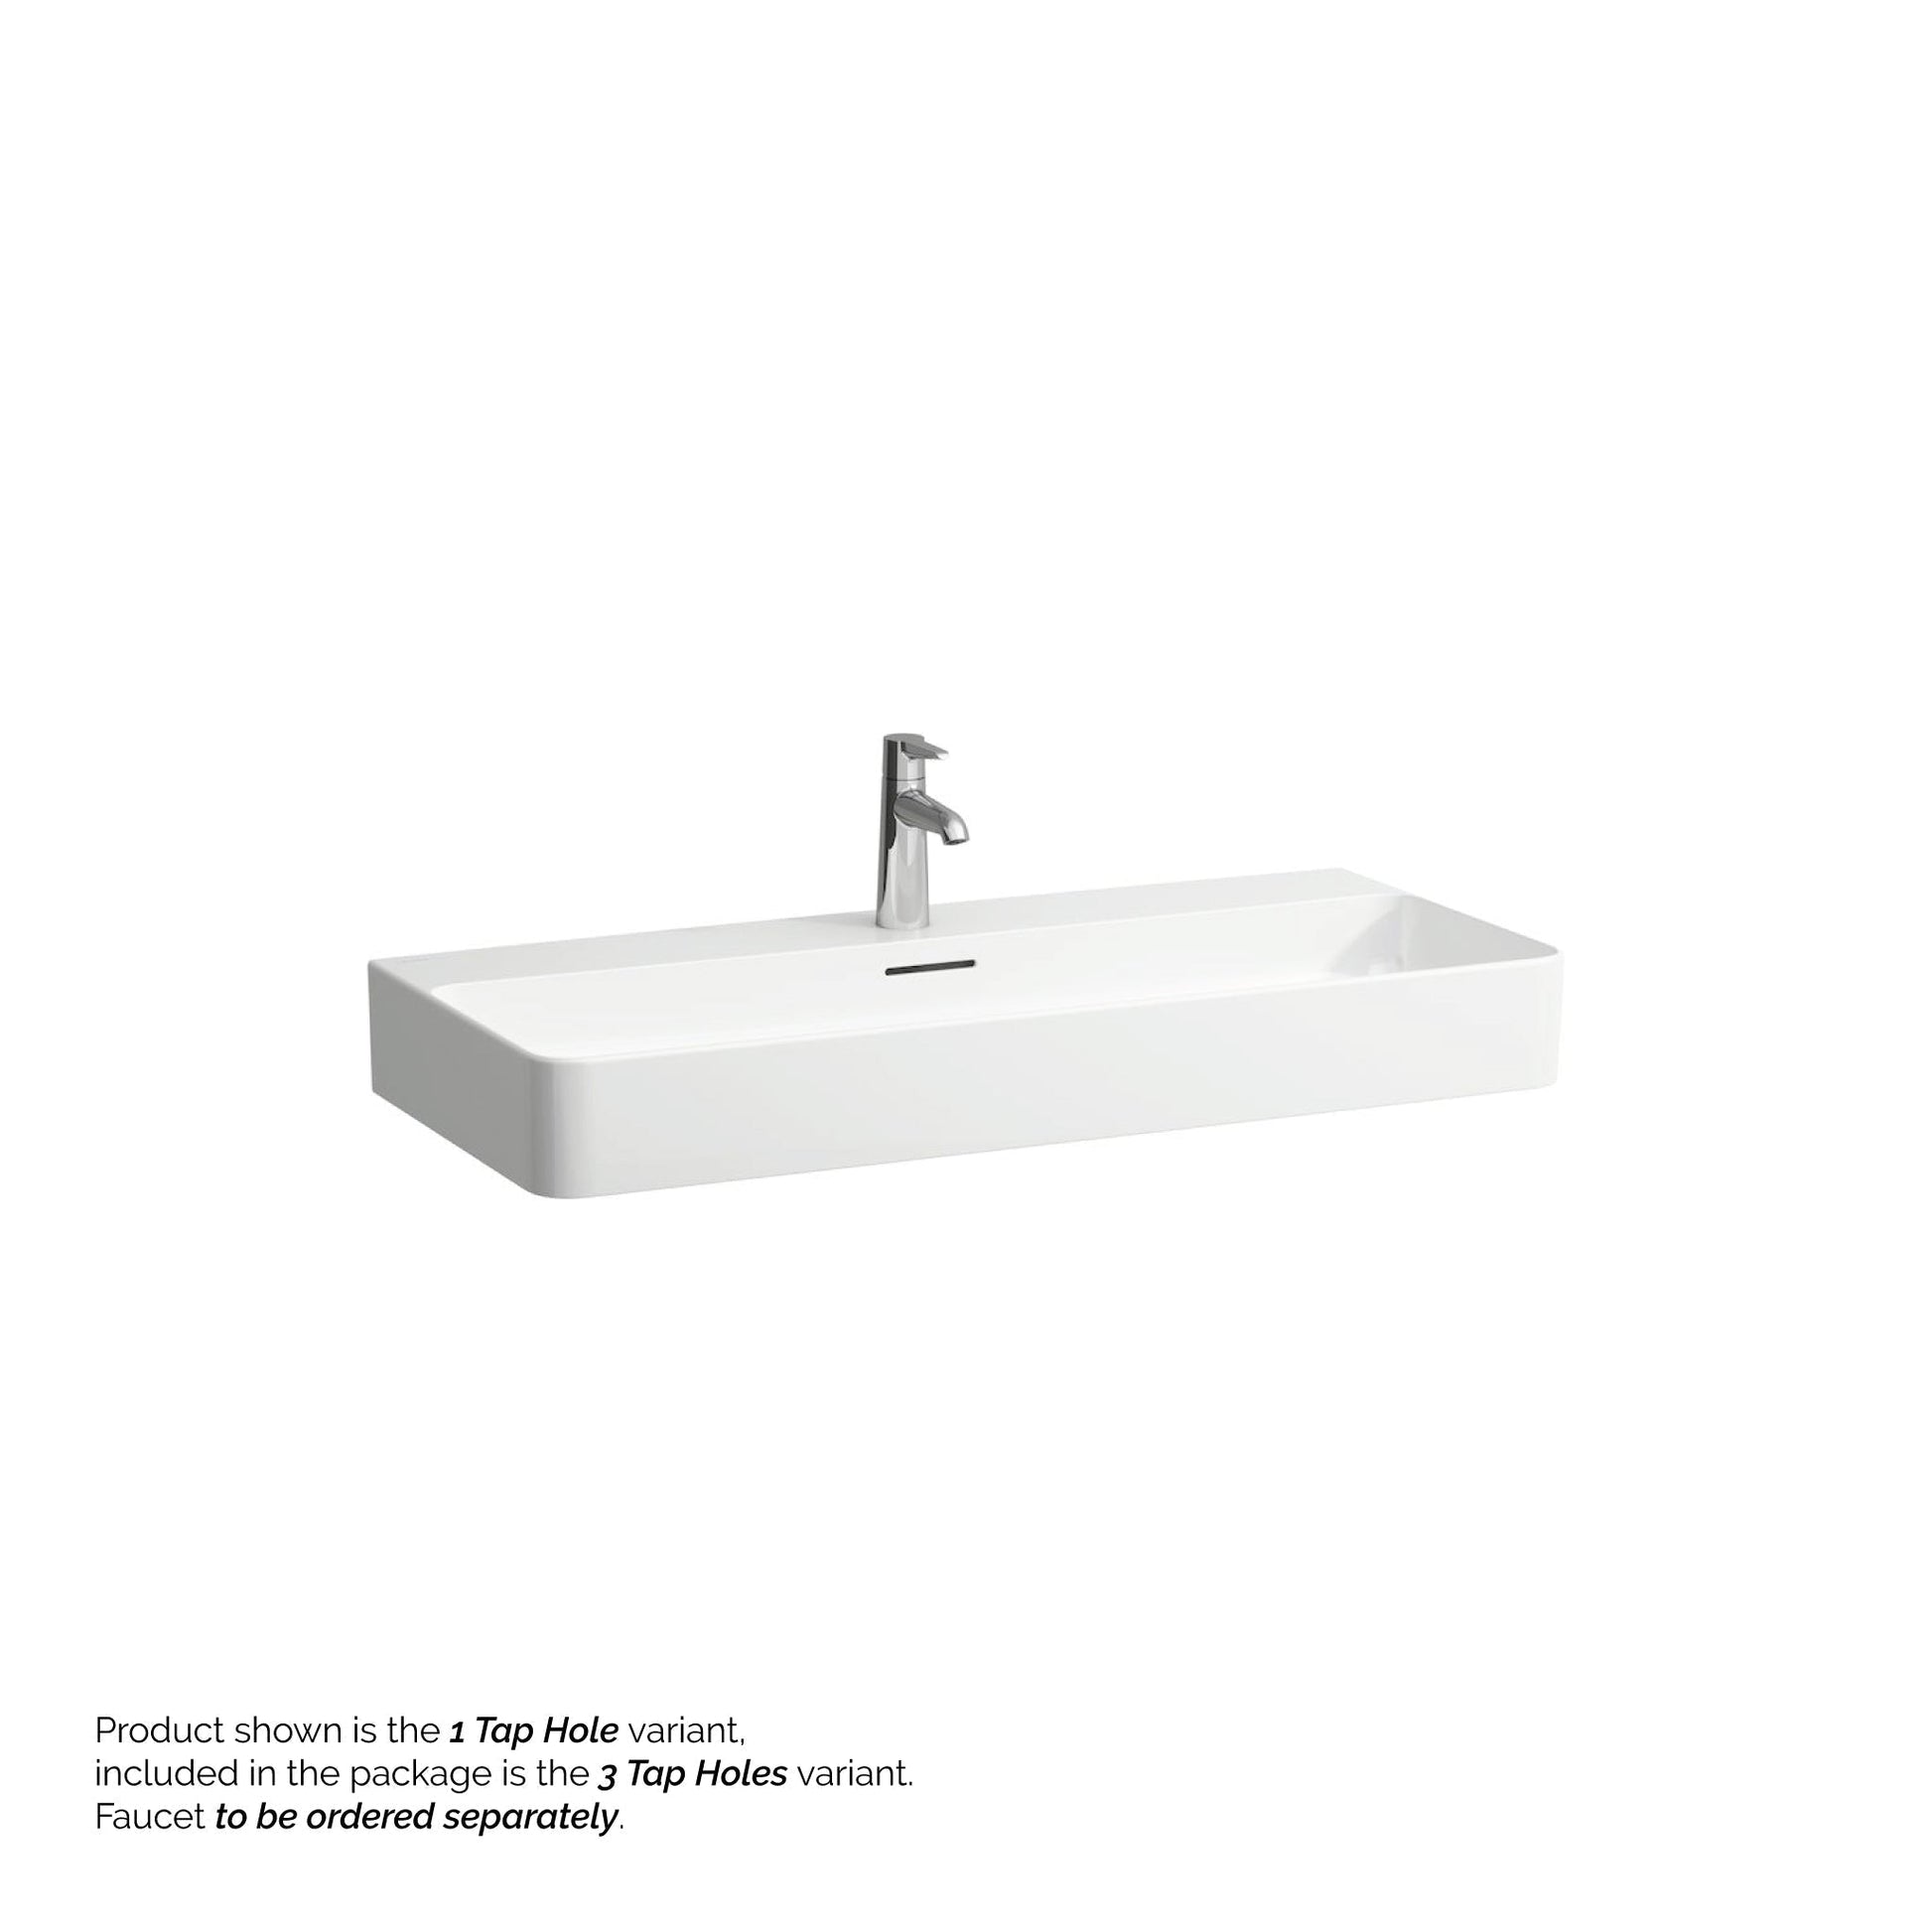 Laufen Val 37" x 17" White Ceramic Wall-Mounted Bathroom Sink With 3 Faucet Holes